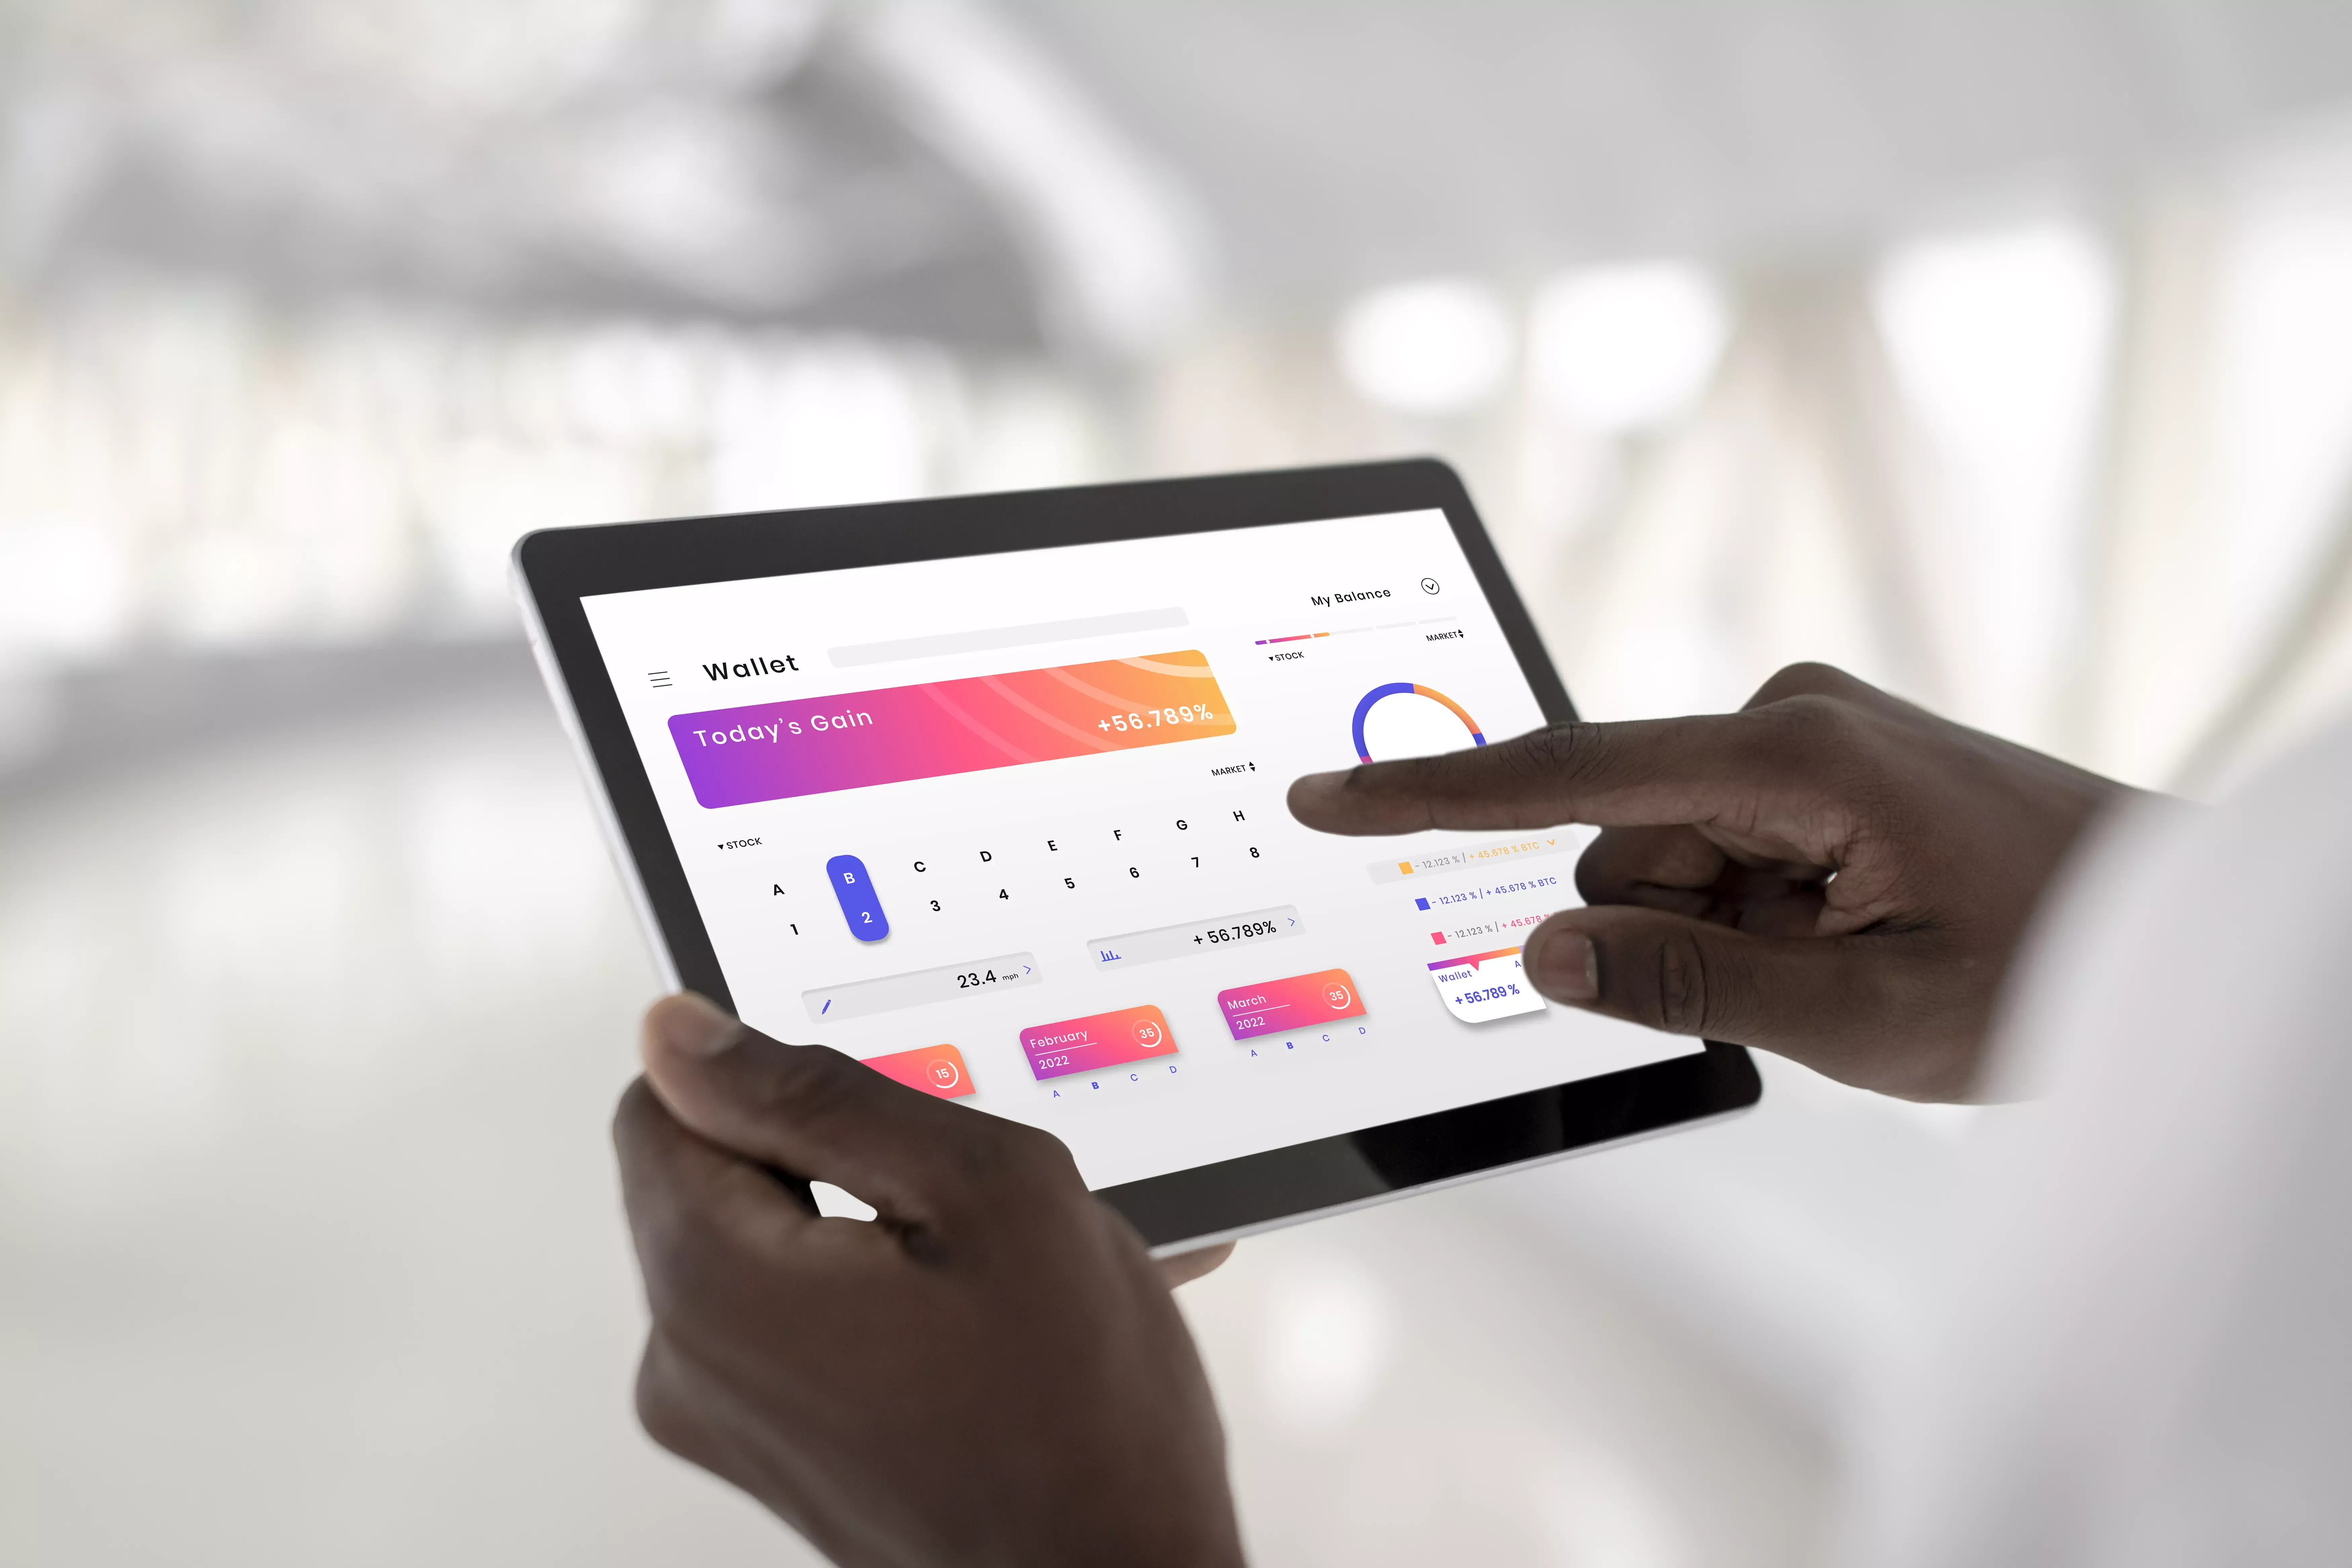 Analytics dashboard on a tablet